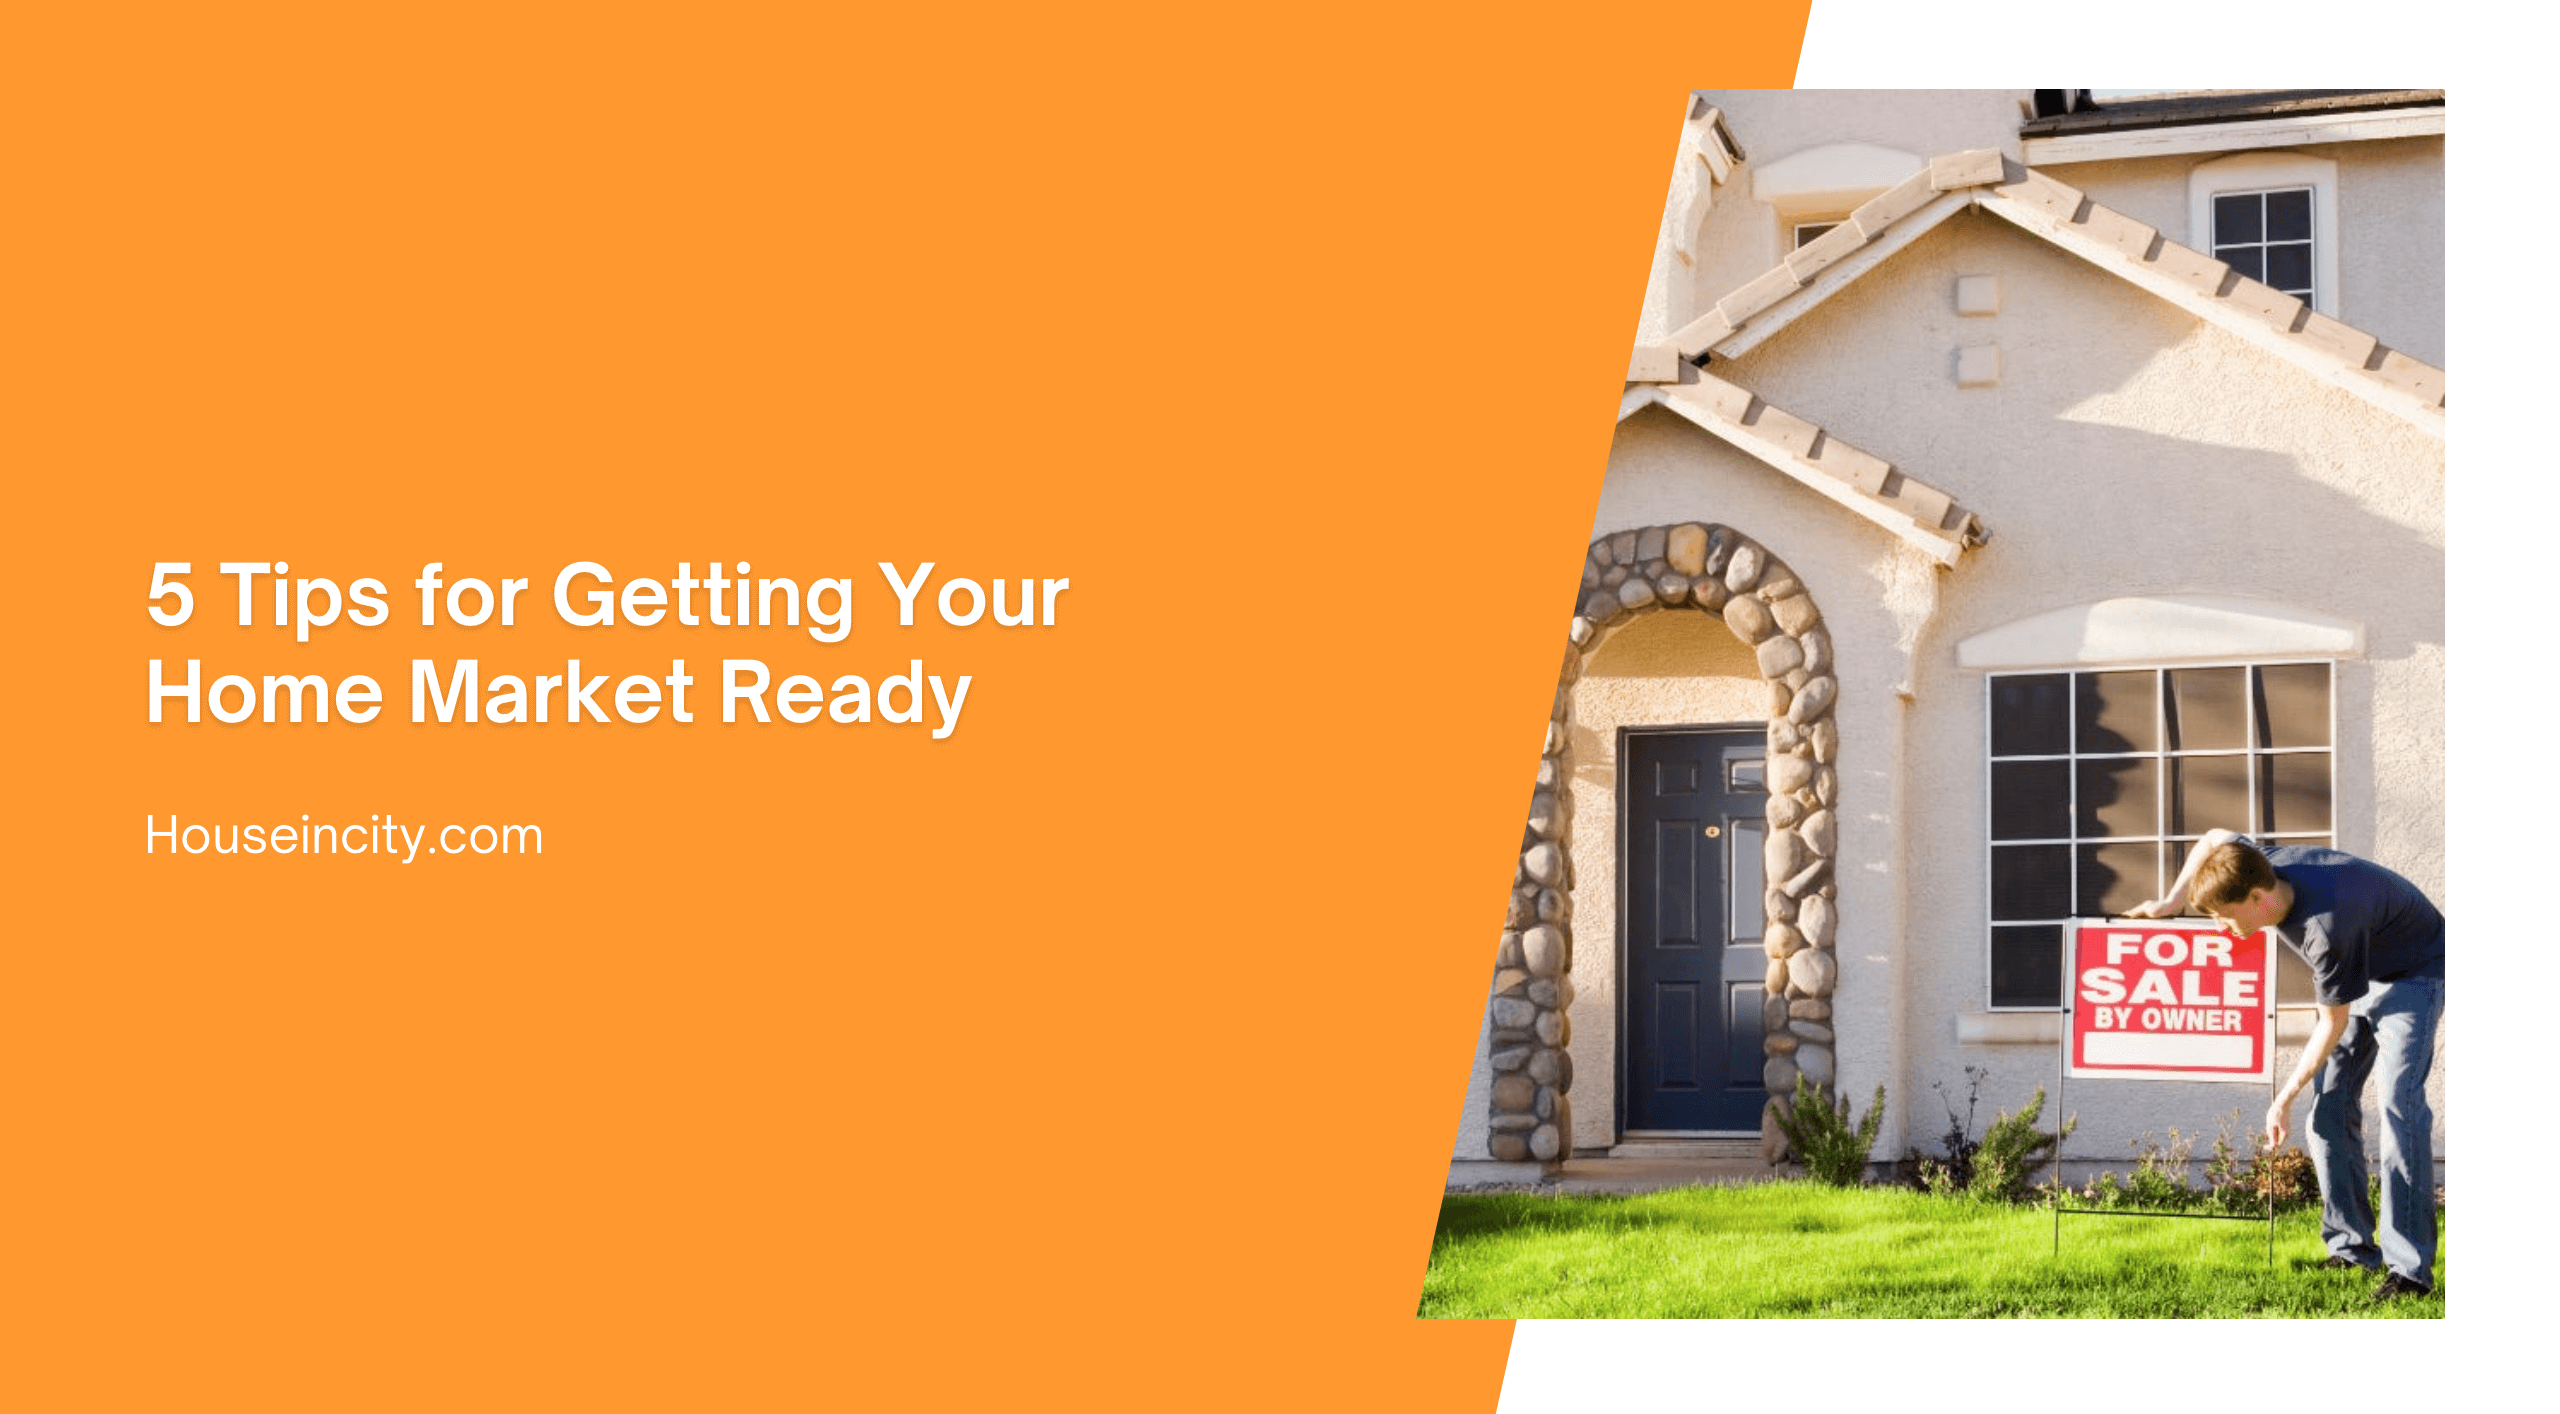 5 Tips for Getting Your Home Market Ready